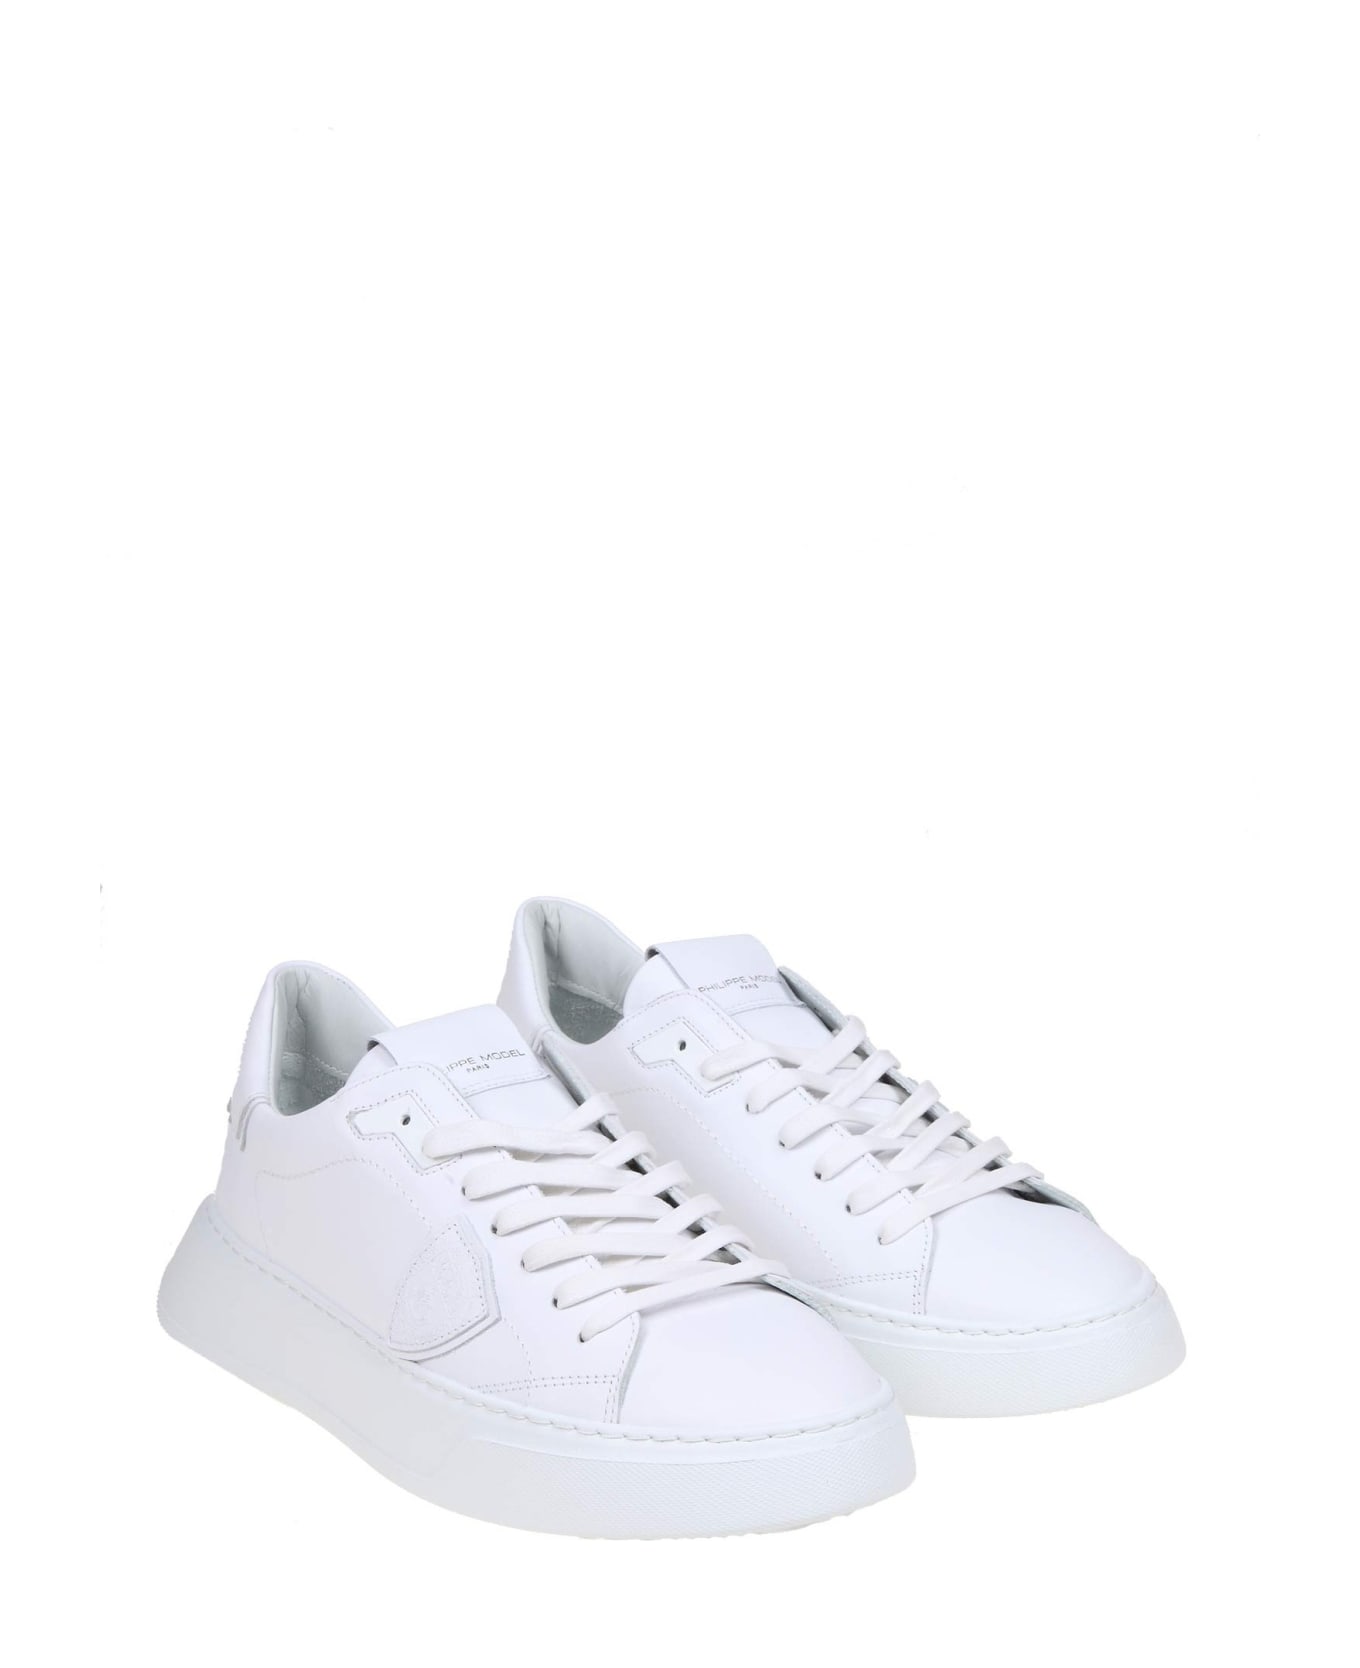 Philippe Model Temple Sneakers In White Leather - WHITE